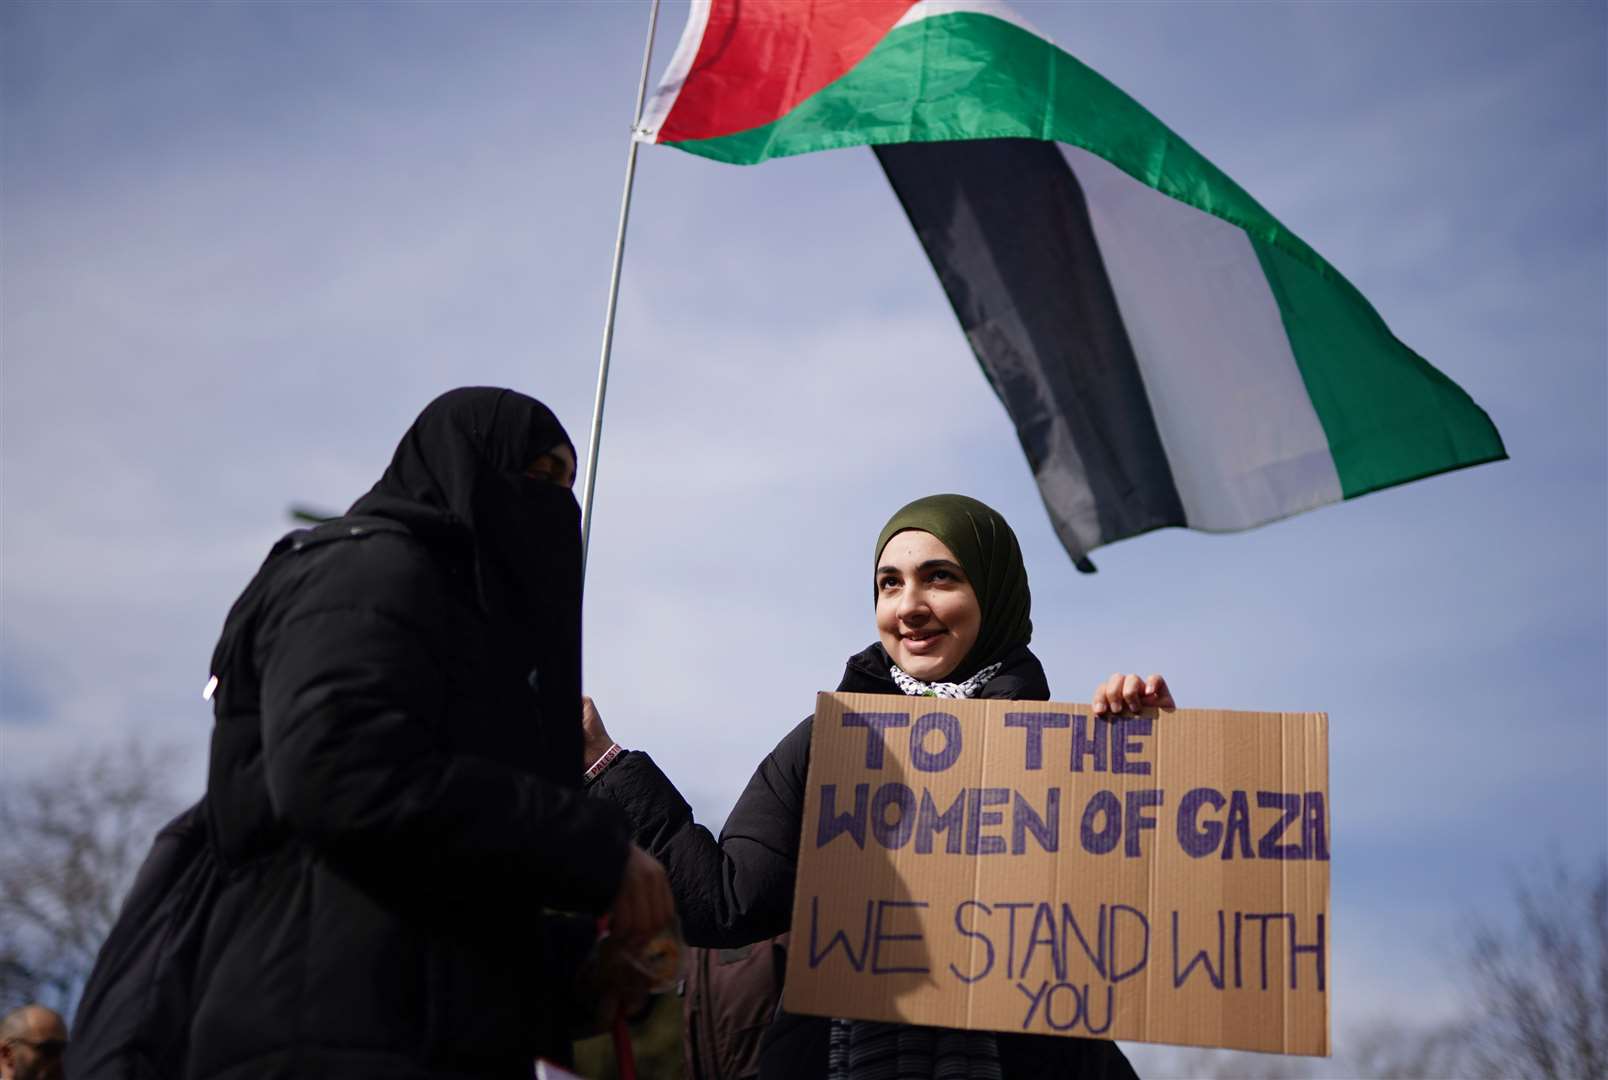 Some Labour councillors have resigned from the party because of its stance on Gaza (Jordan Pettitt/PA)